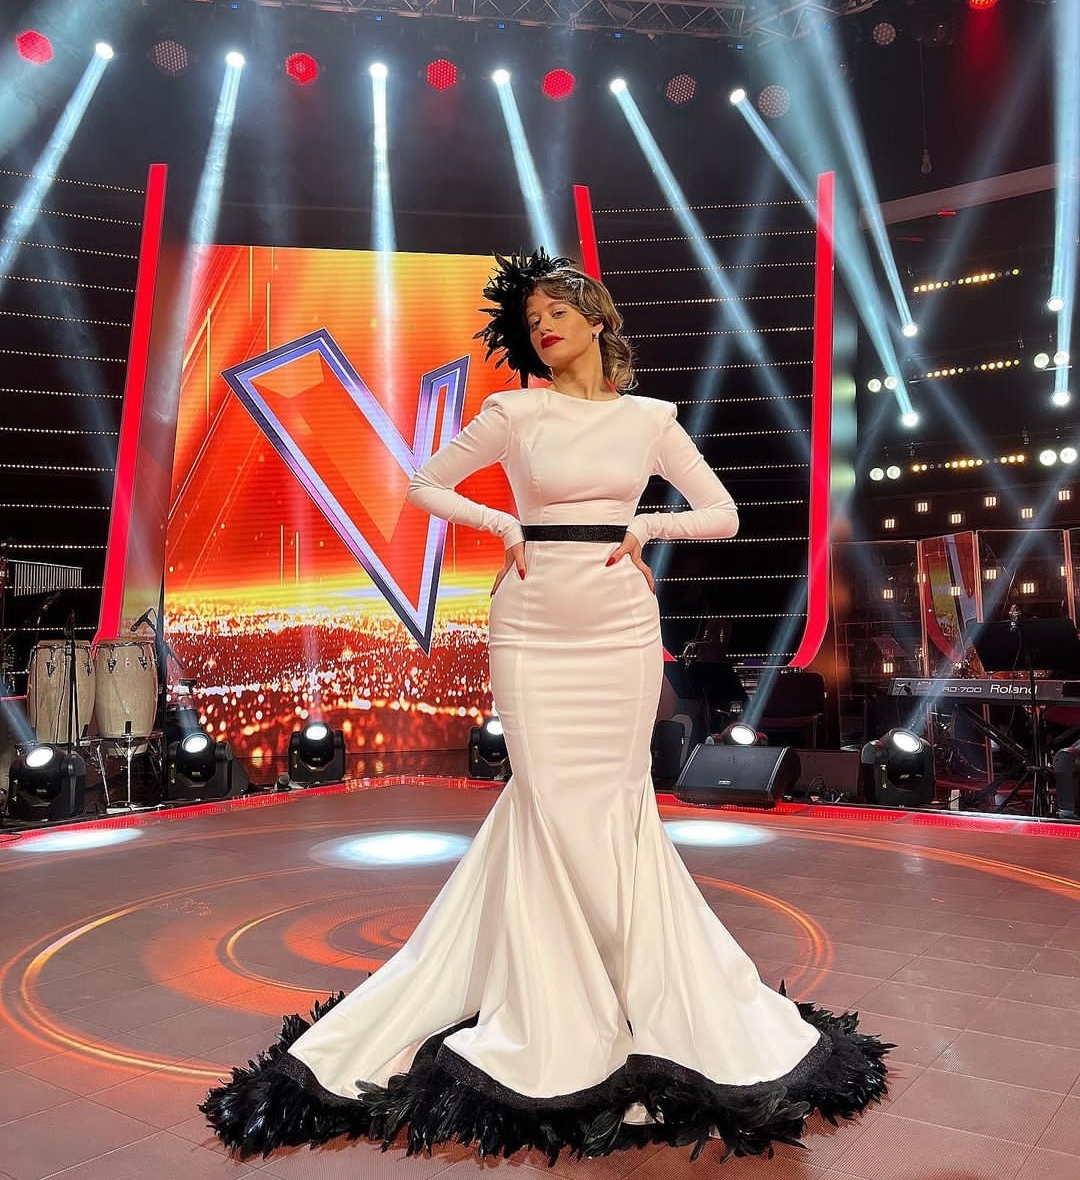 You are currently viewing 🇬🇪 Iru Khechanovi wins The Voice Georgia